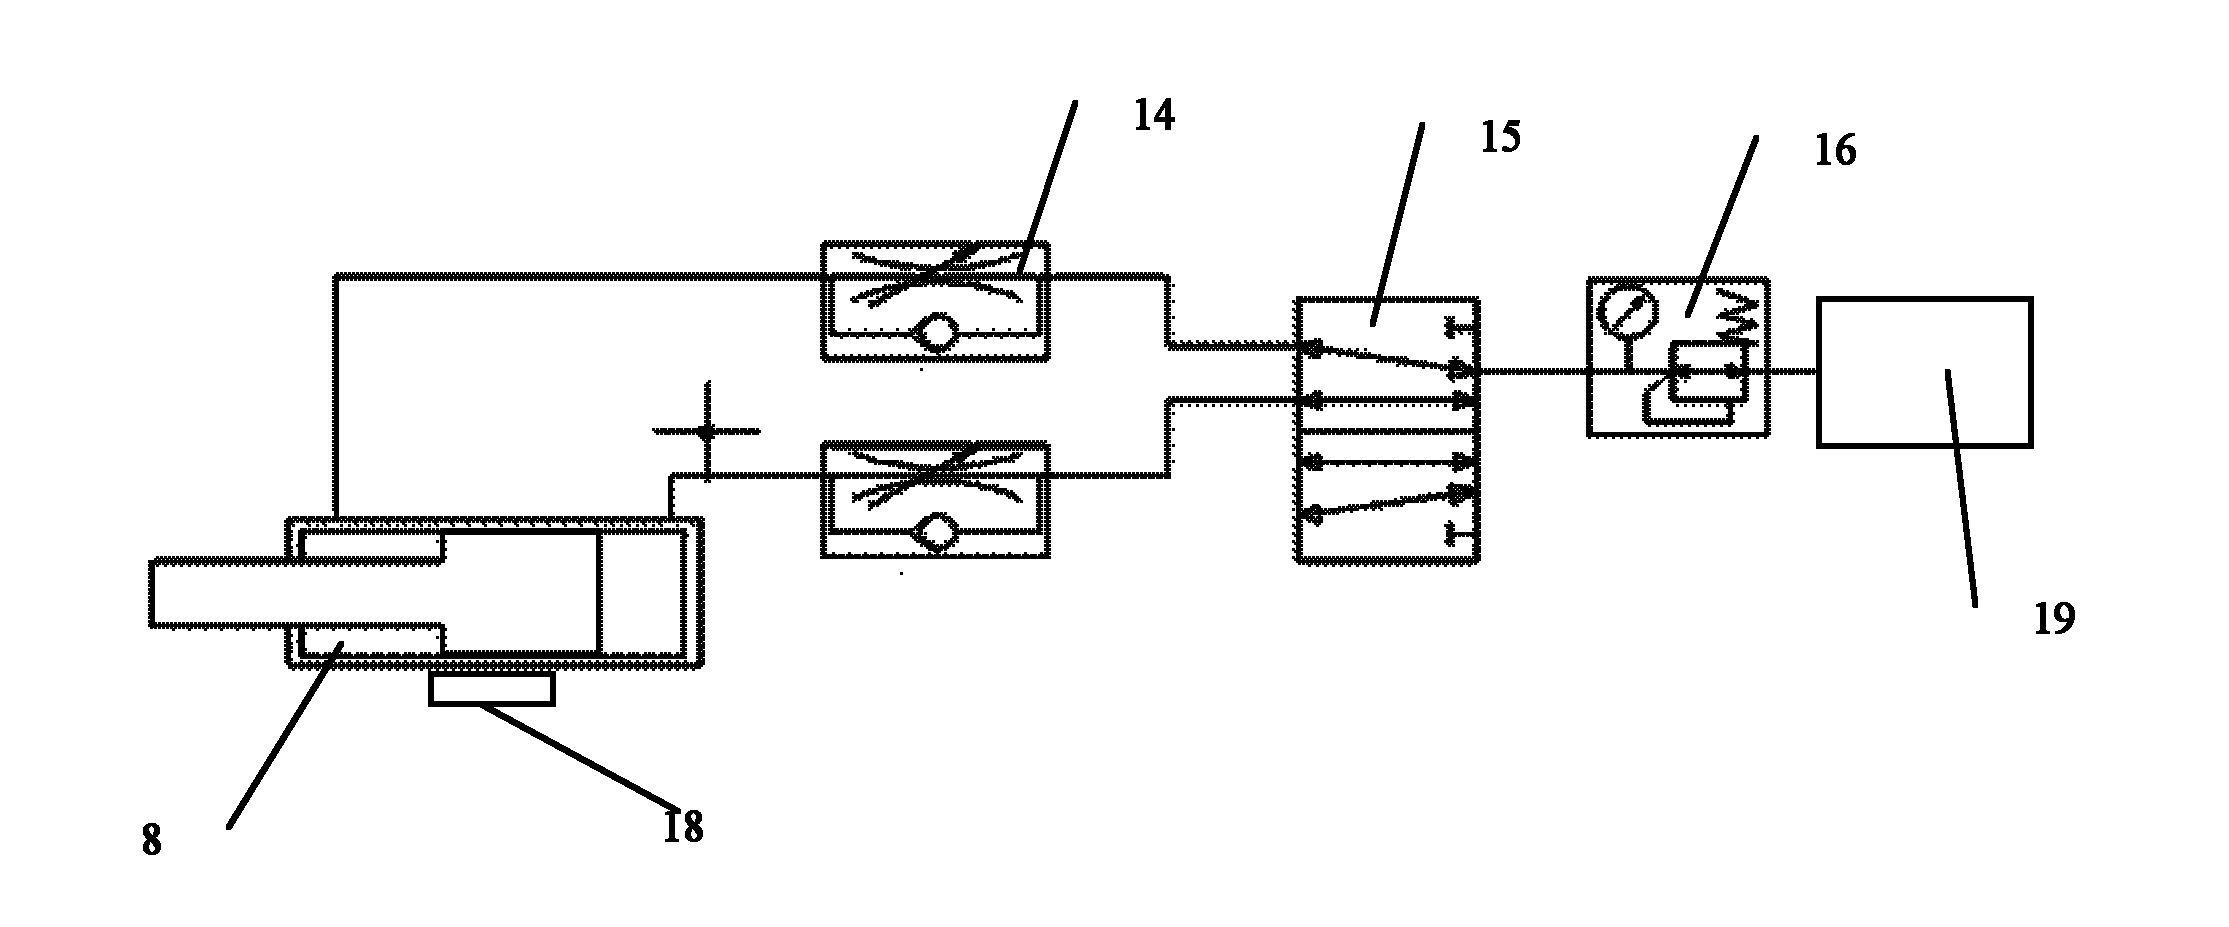 Wiring harness stretch performance detection device